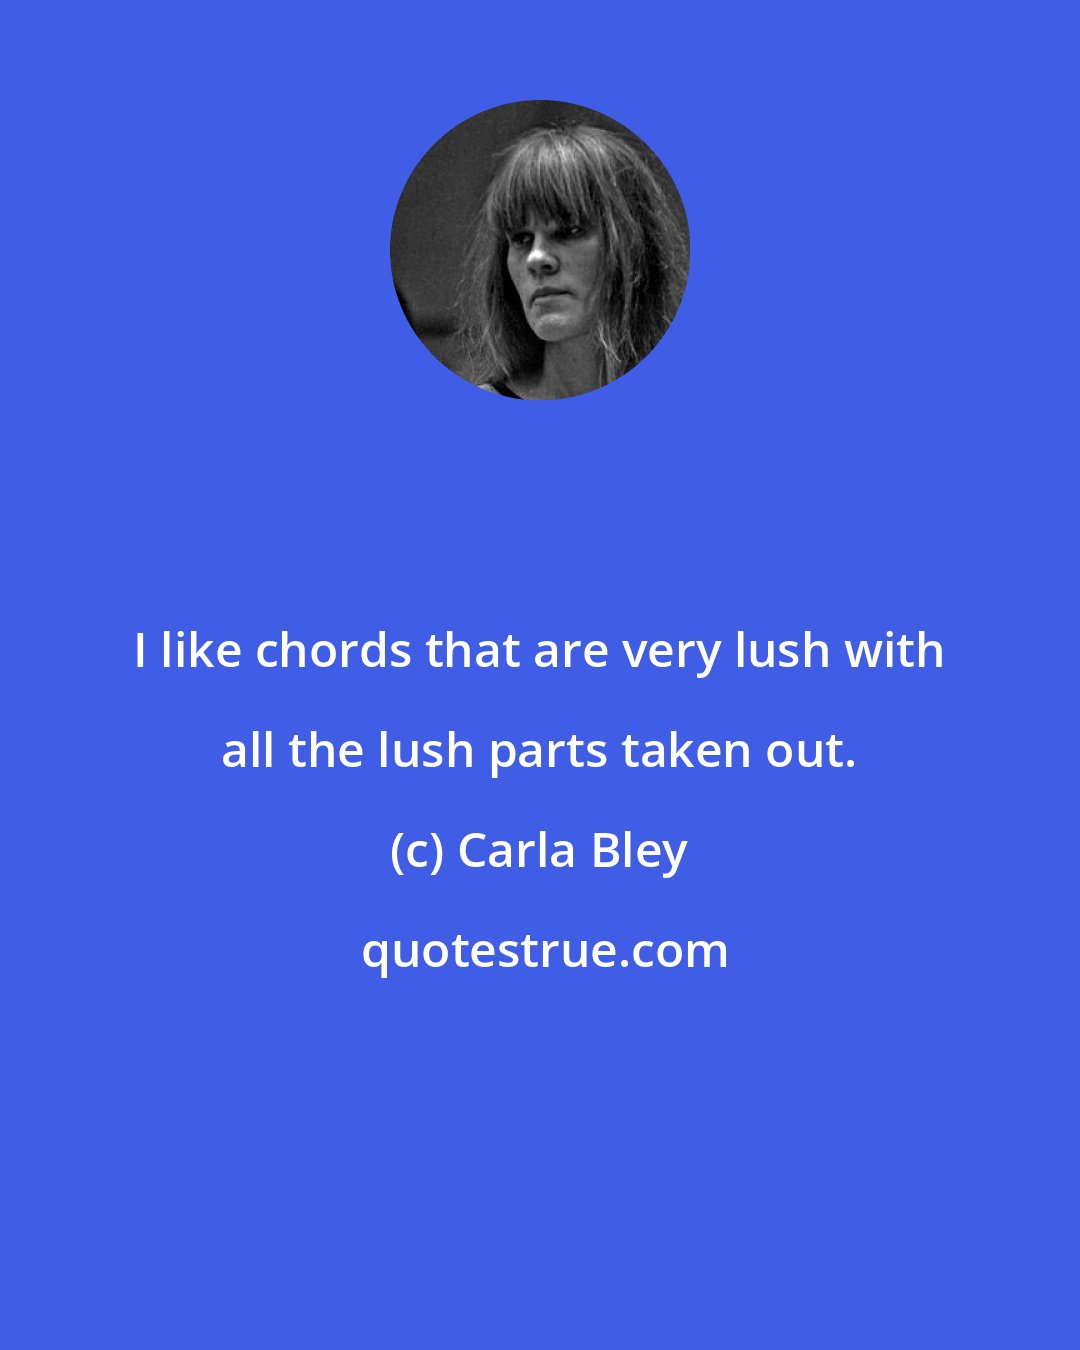 Carla Bley: I like chords that are very lush with all the lush parts taken out.